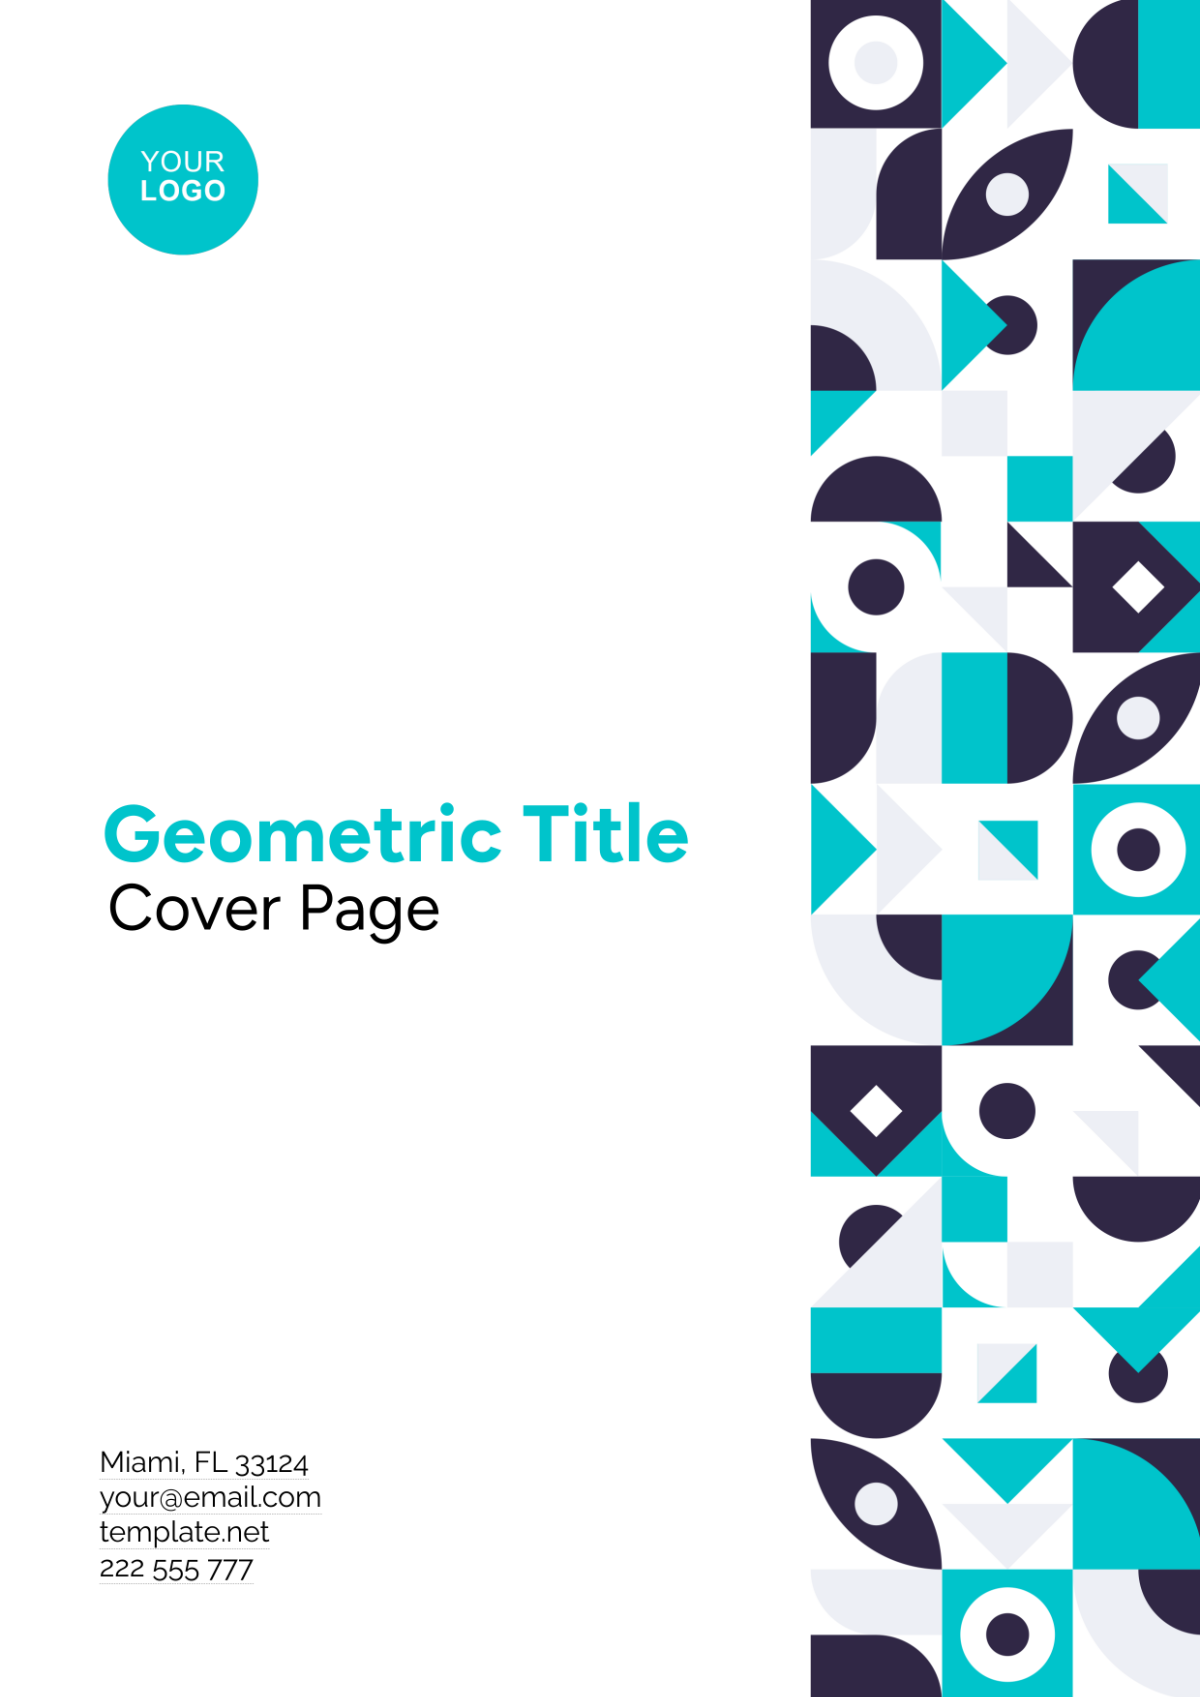 Geometric Title Cover Page Template